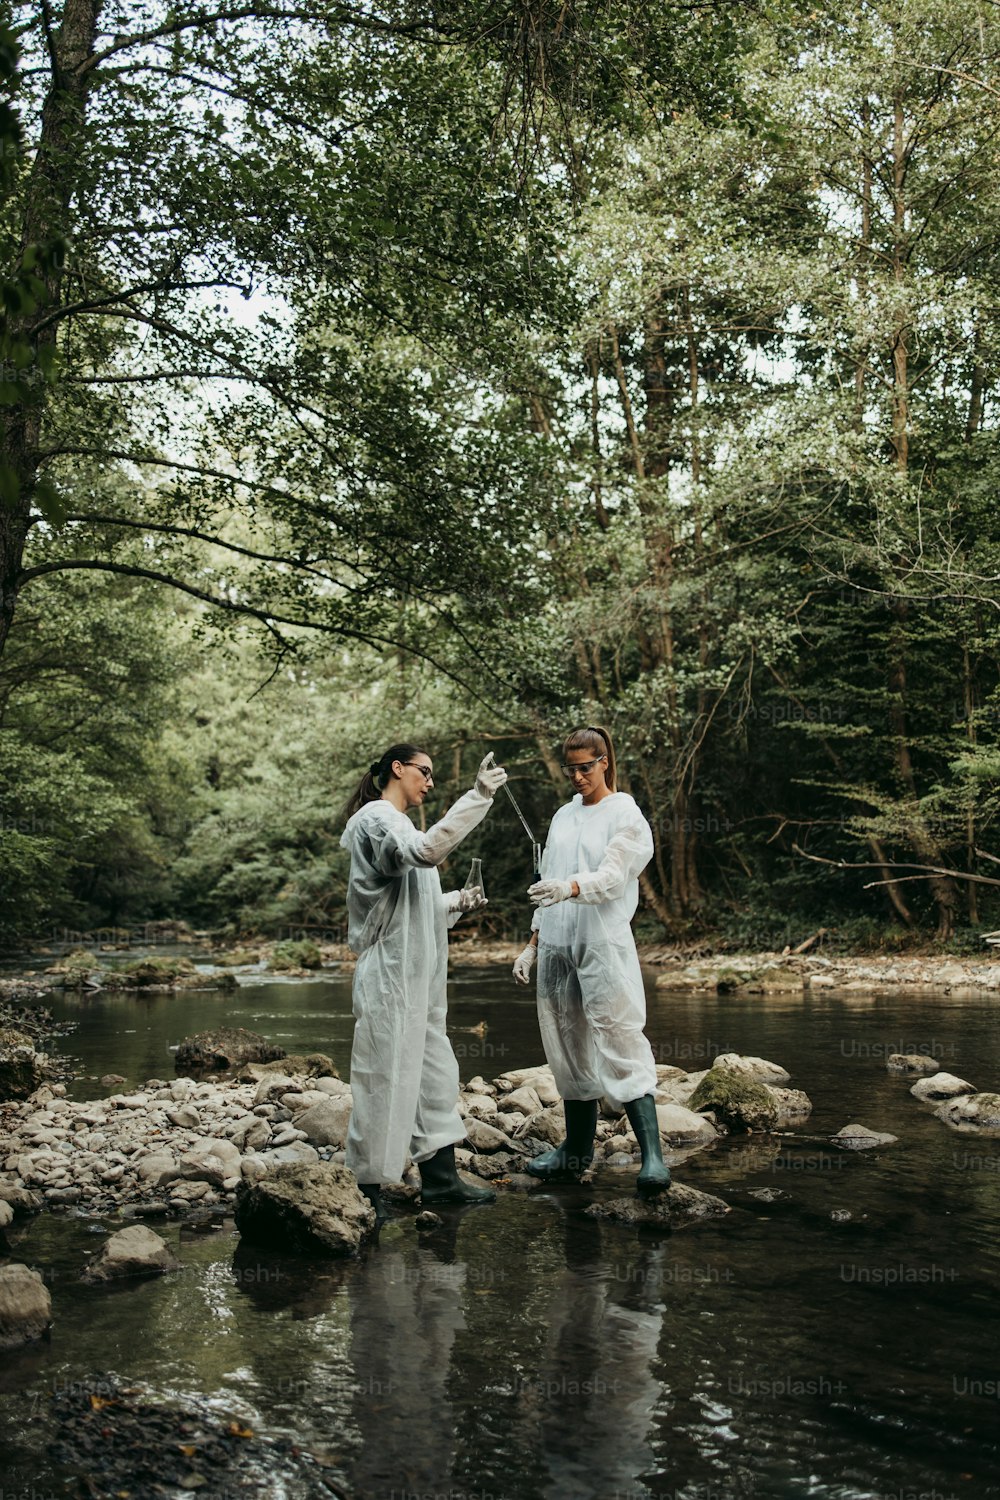 Scientists biologists and researchers in protective suits taking water samples from polluted river.